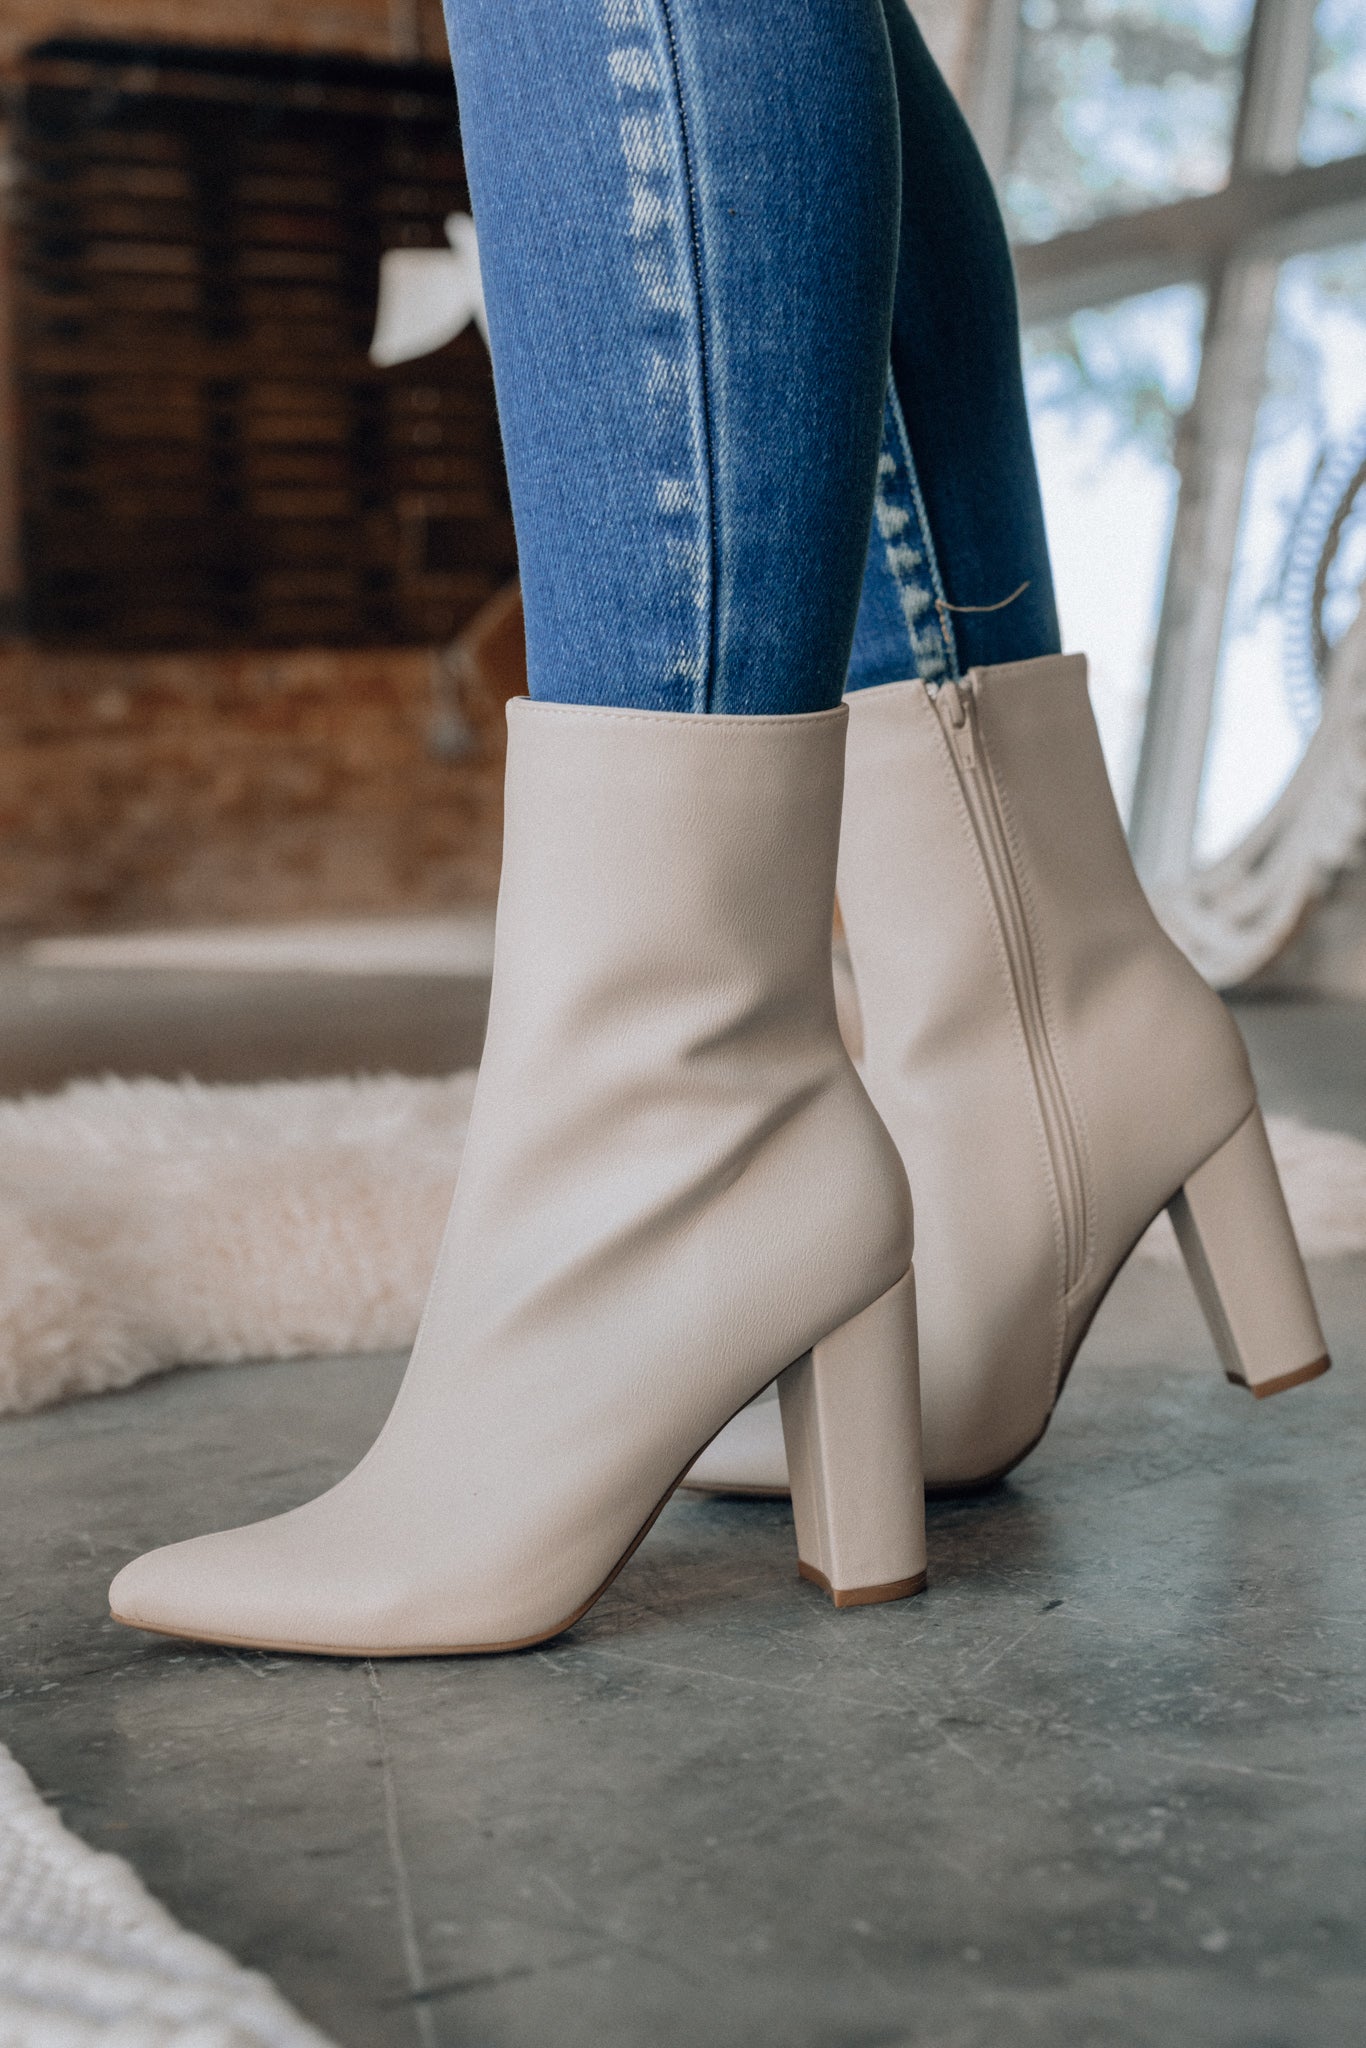 Made For You Ankle Booties (Sand) FINAL SALE